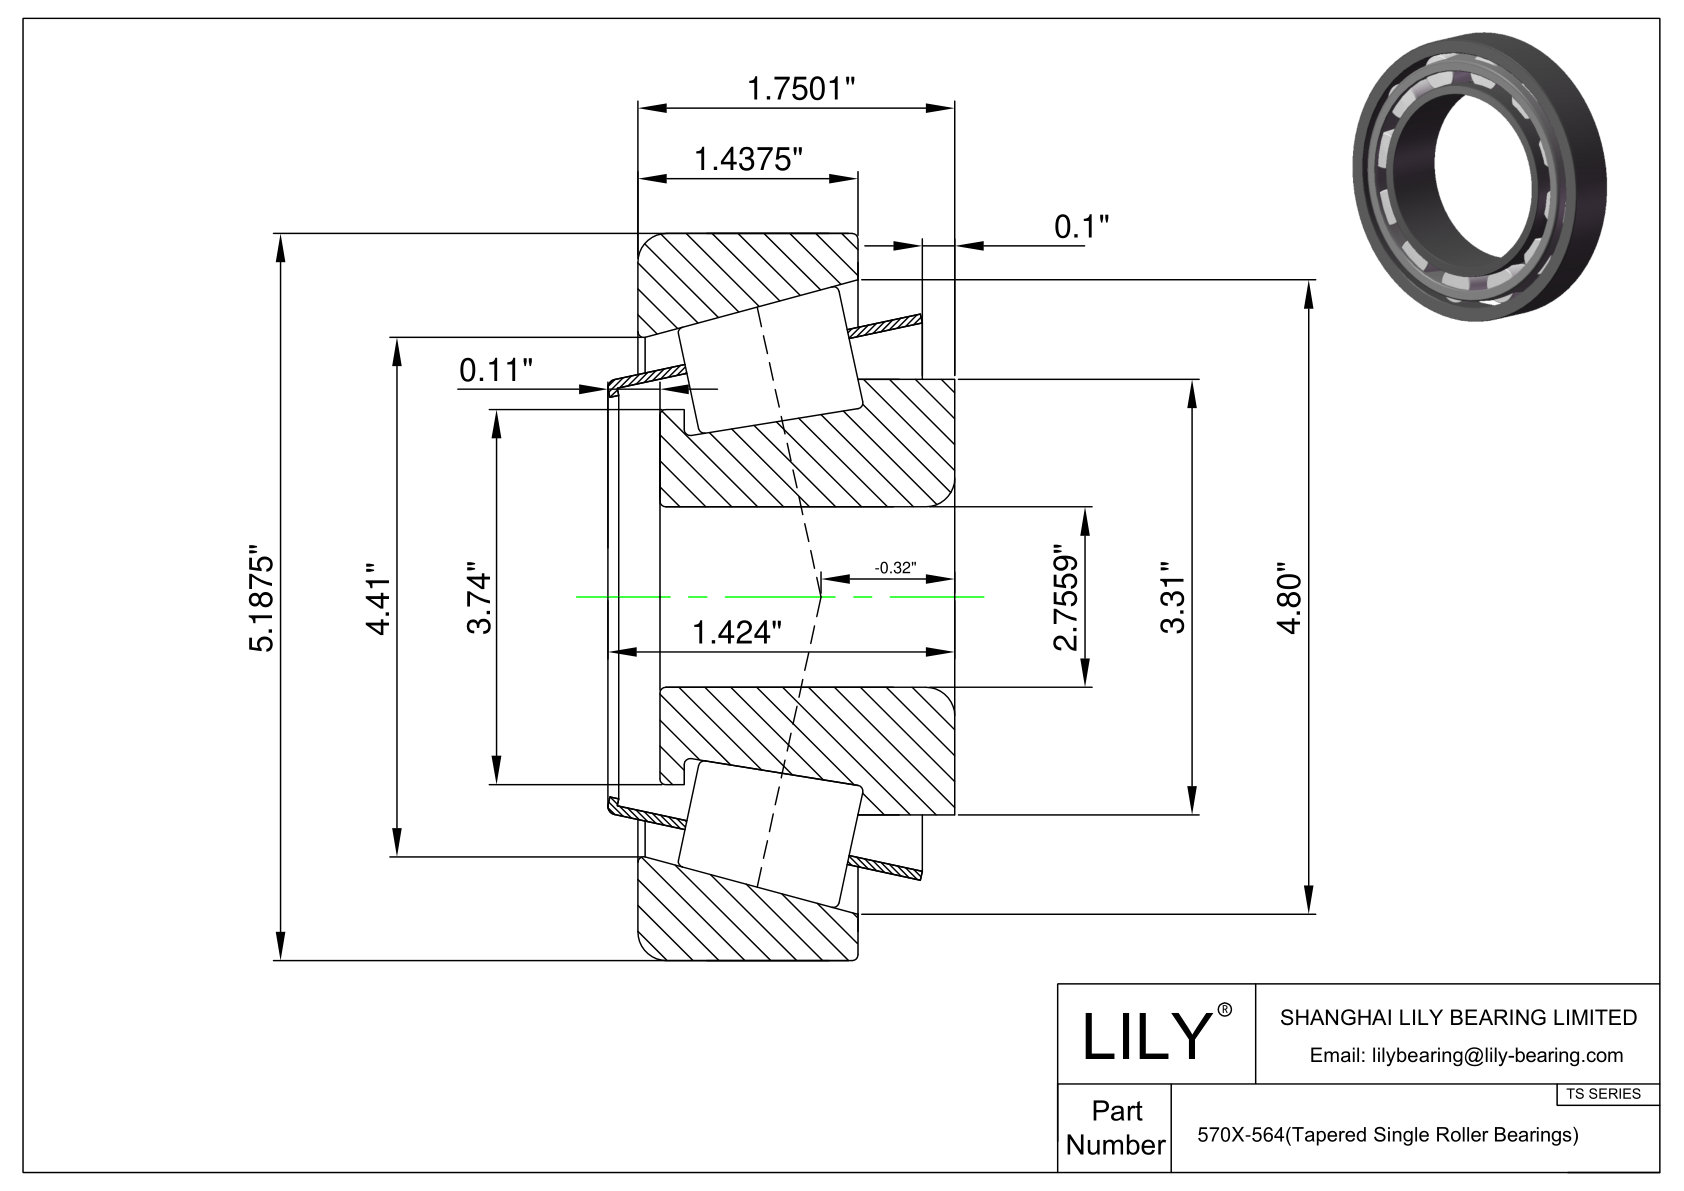 570X-564 TS (Tapered Single Roller Bearings) (Imperial) cad drawing